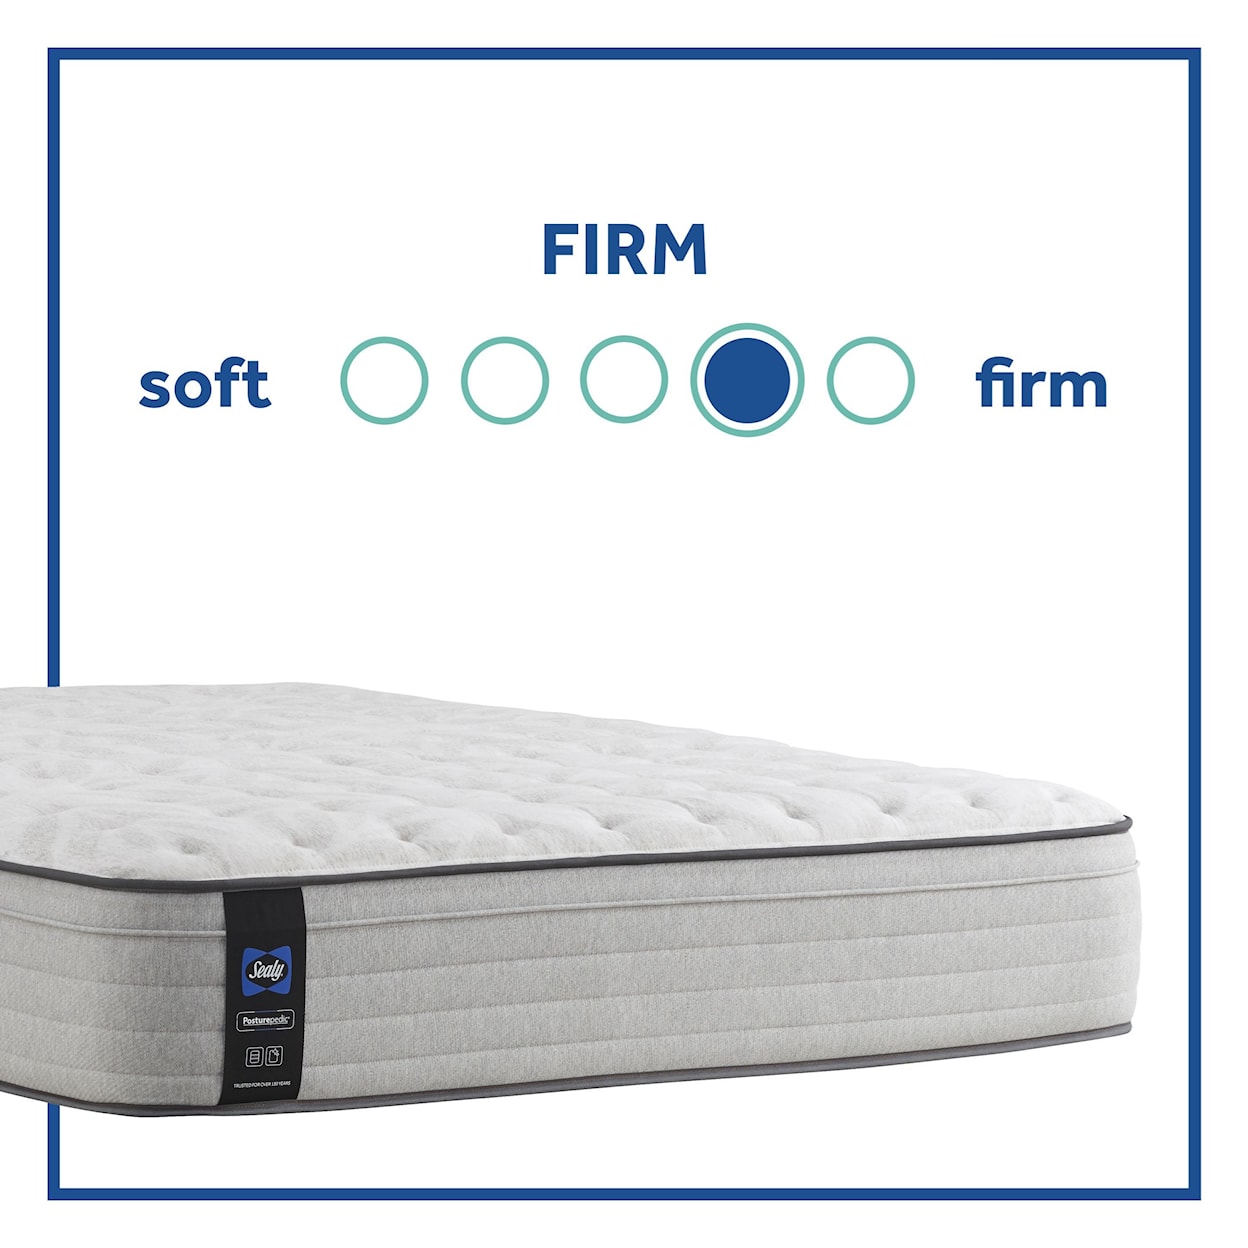 Sealy PPS3 Posturpedic Innerspring Firm FXET Twin 13" Firm FXET Mattress